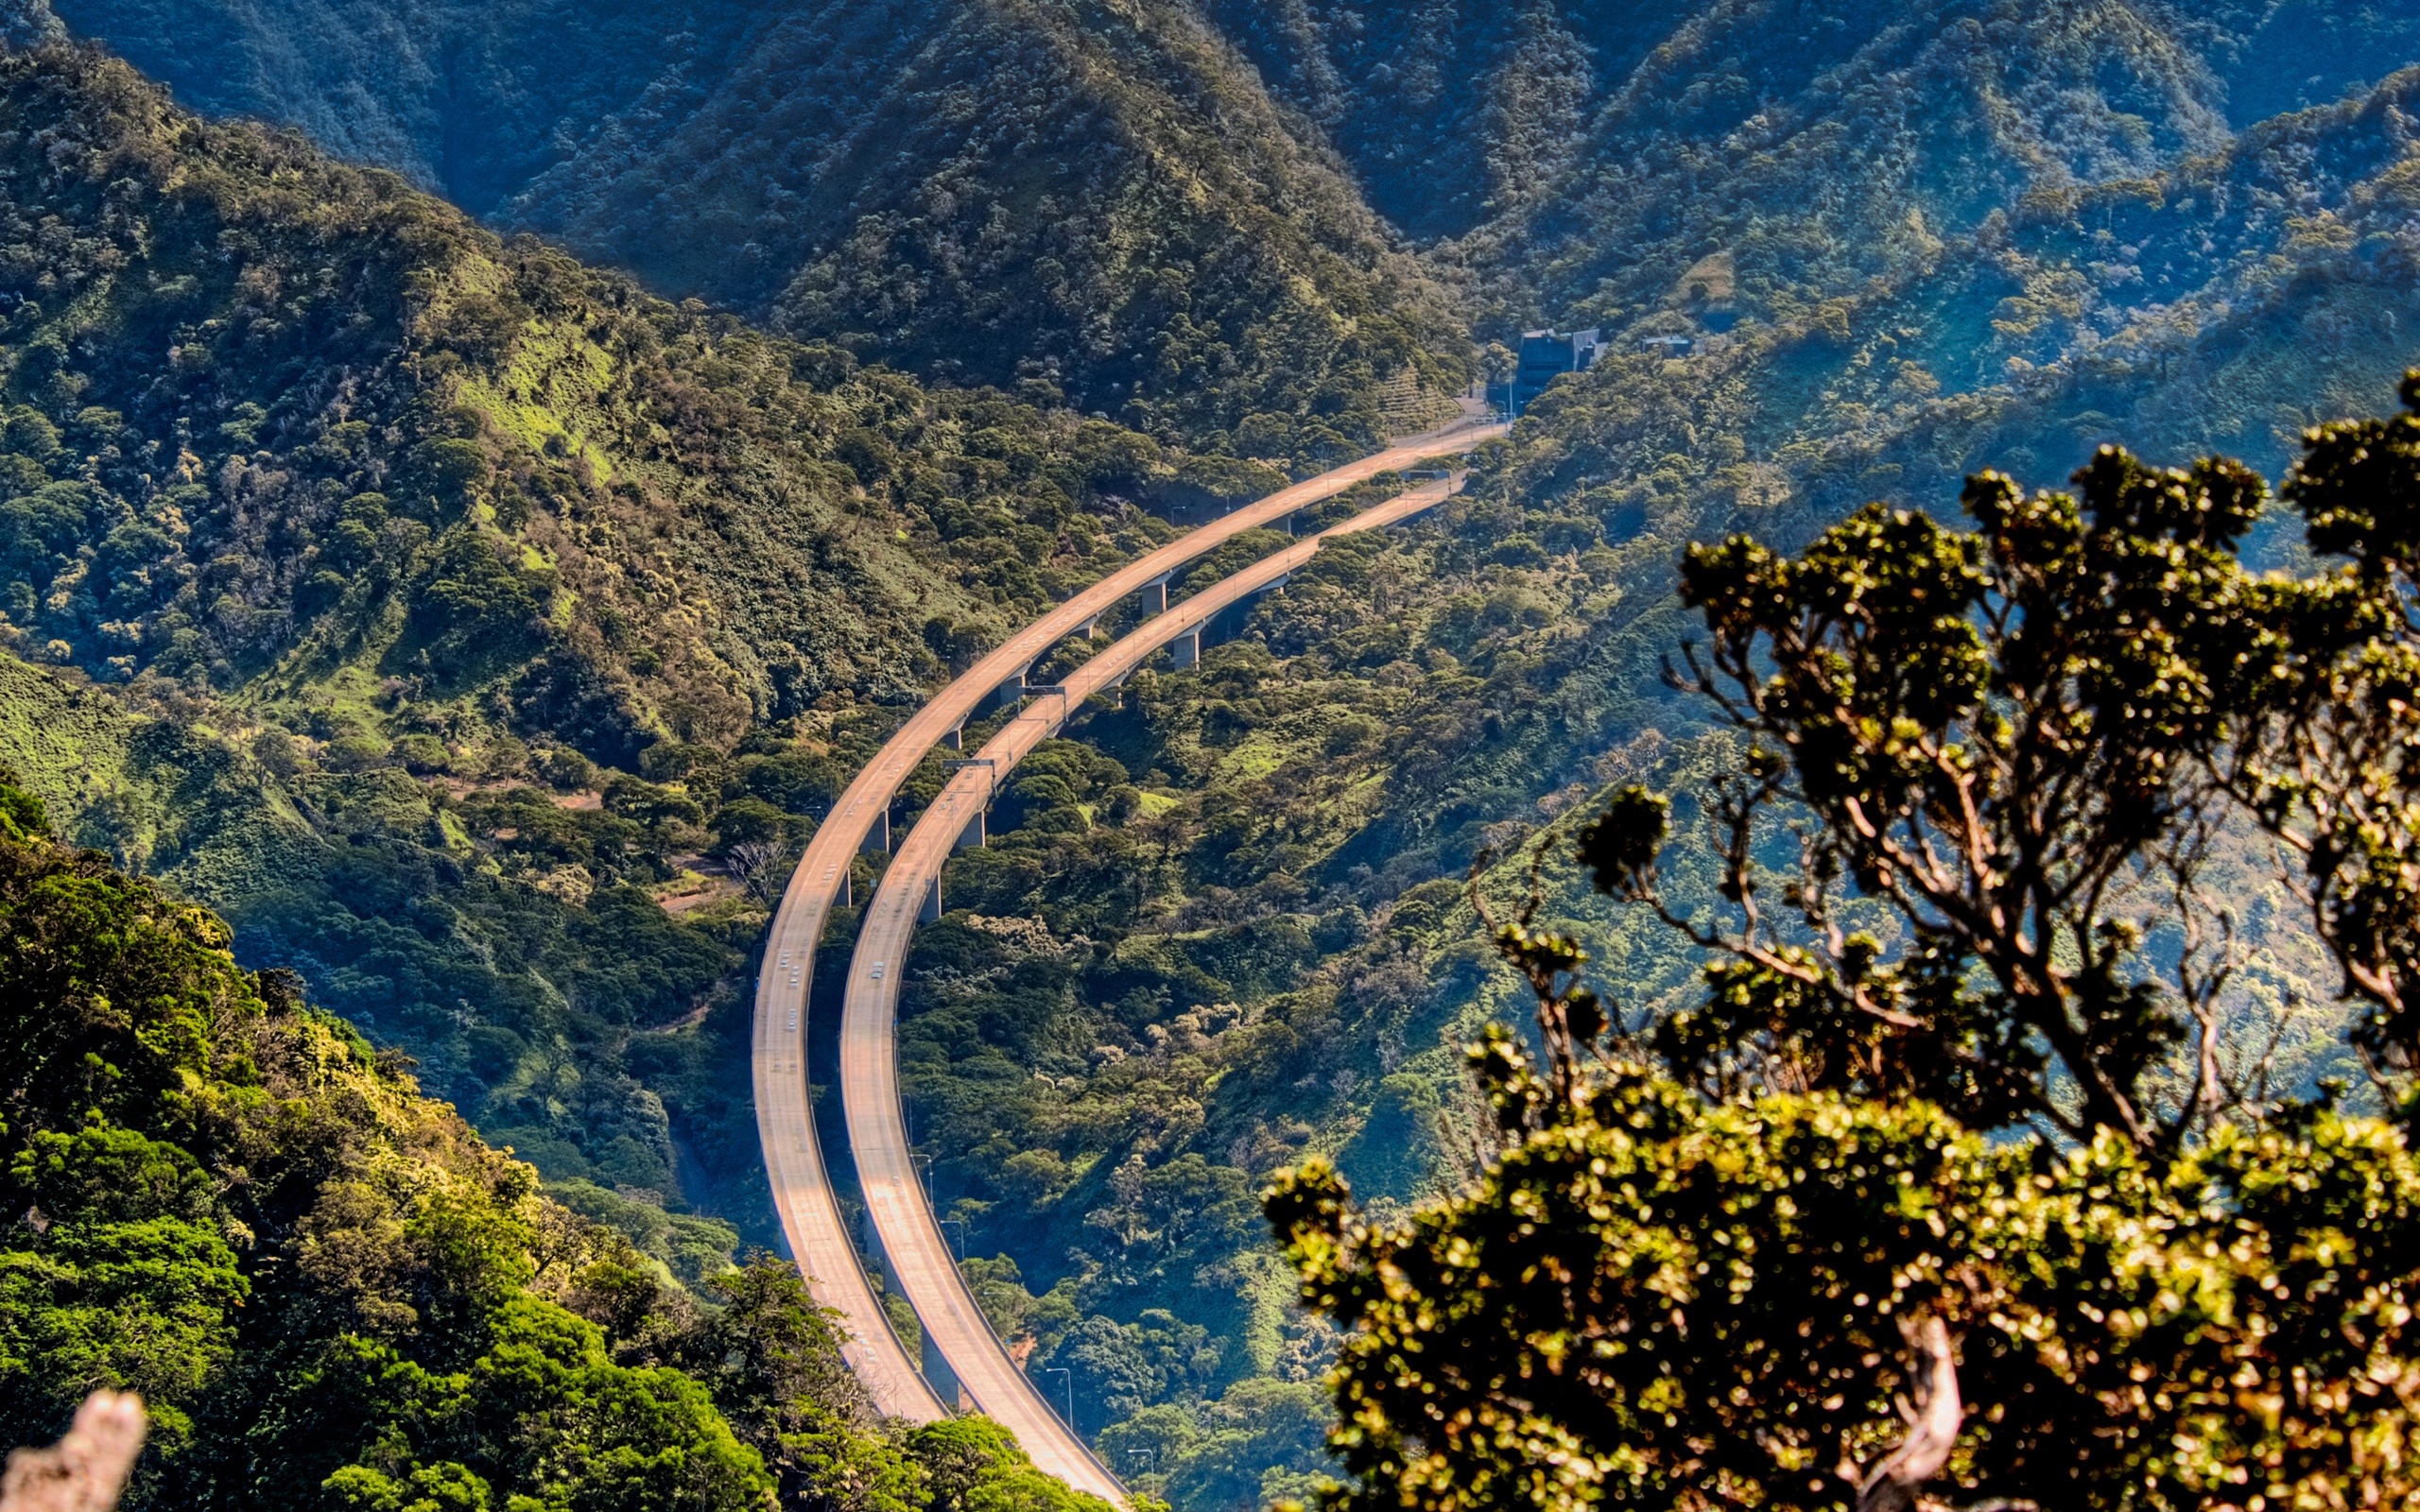 General 2560x1600 landscape nature oahu Hawaii highway mountains USA